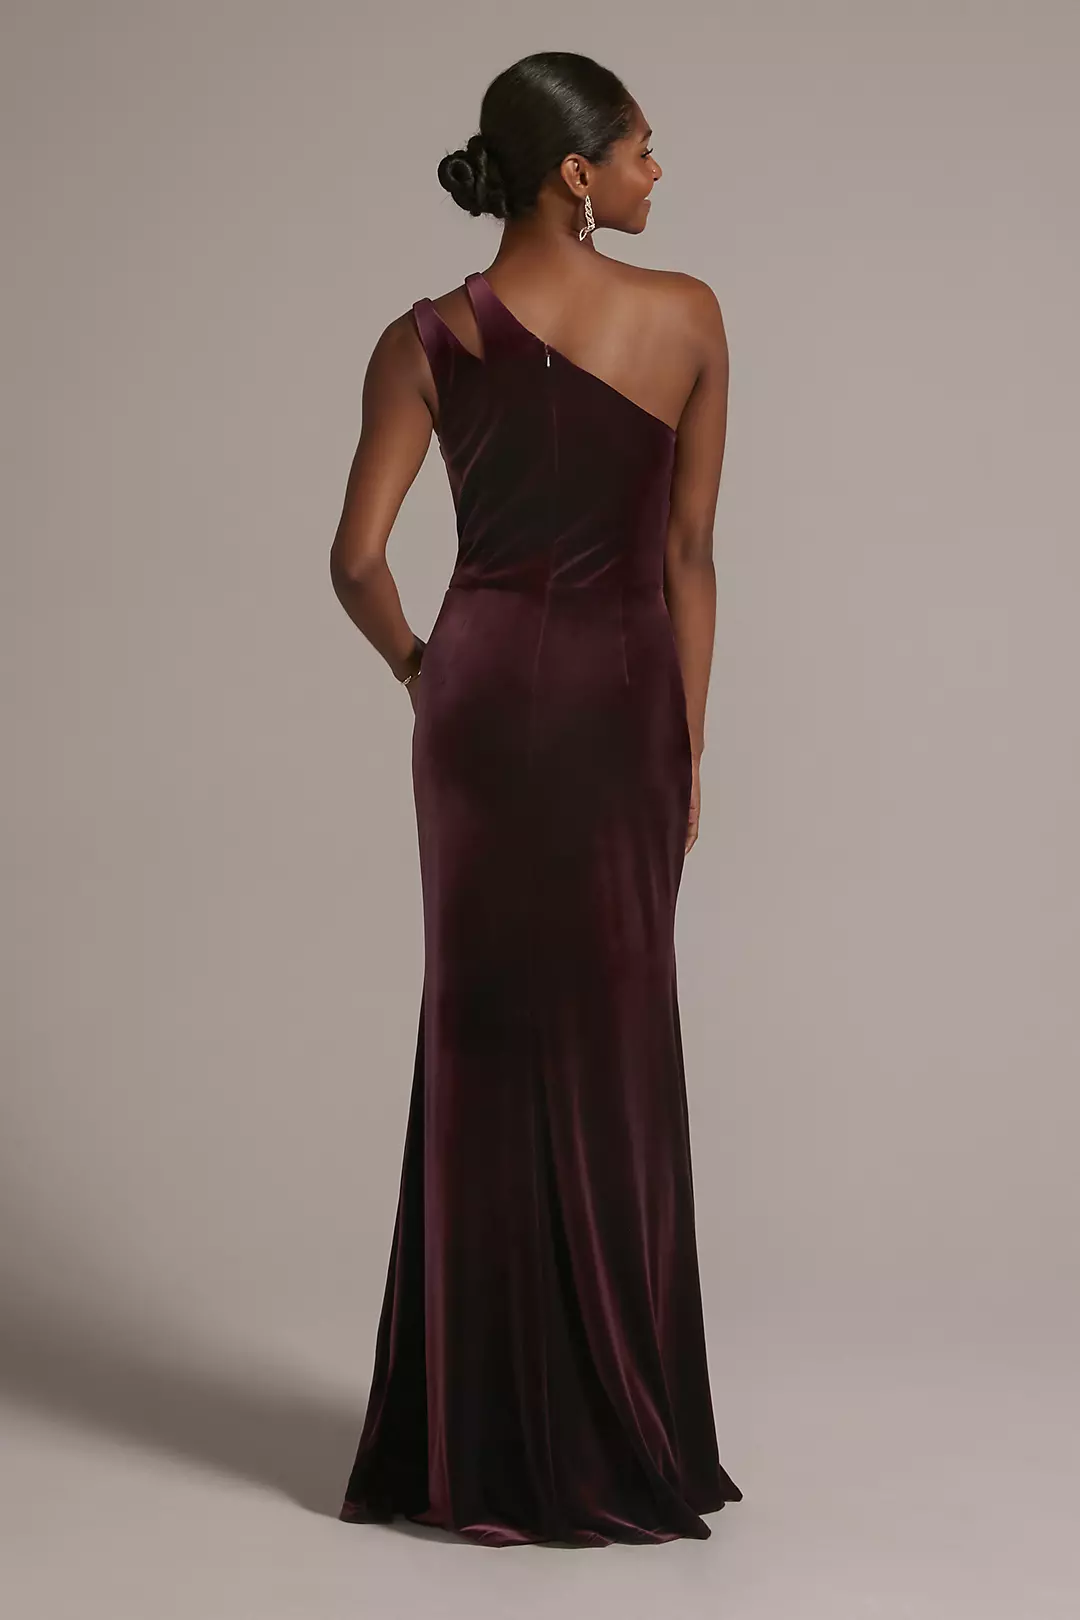 Cutout One-Shoulder Velvet Gown with Skirt Slit Image 2